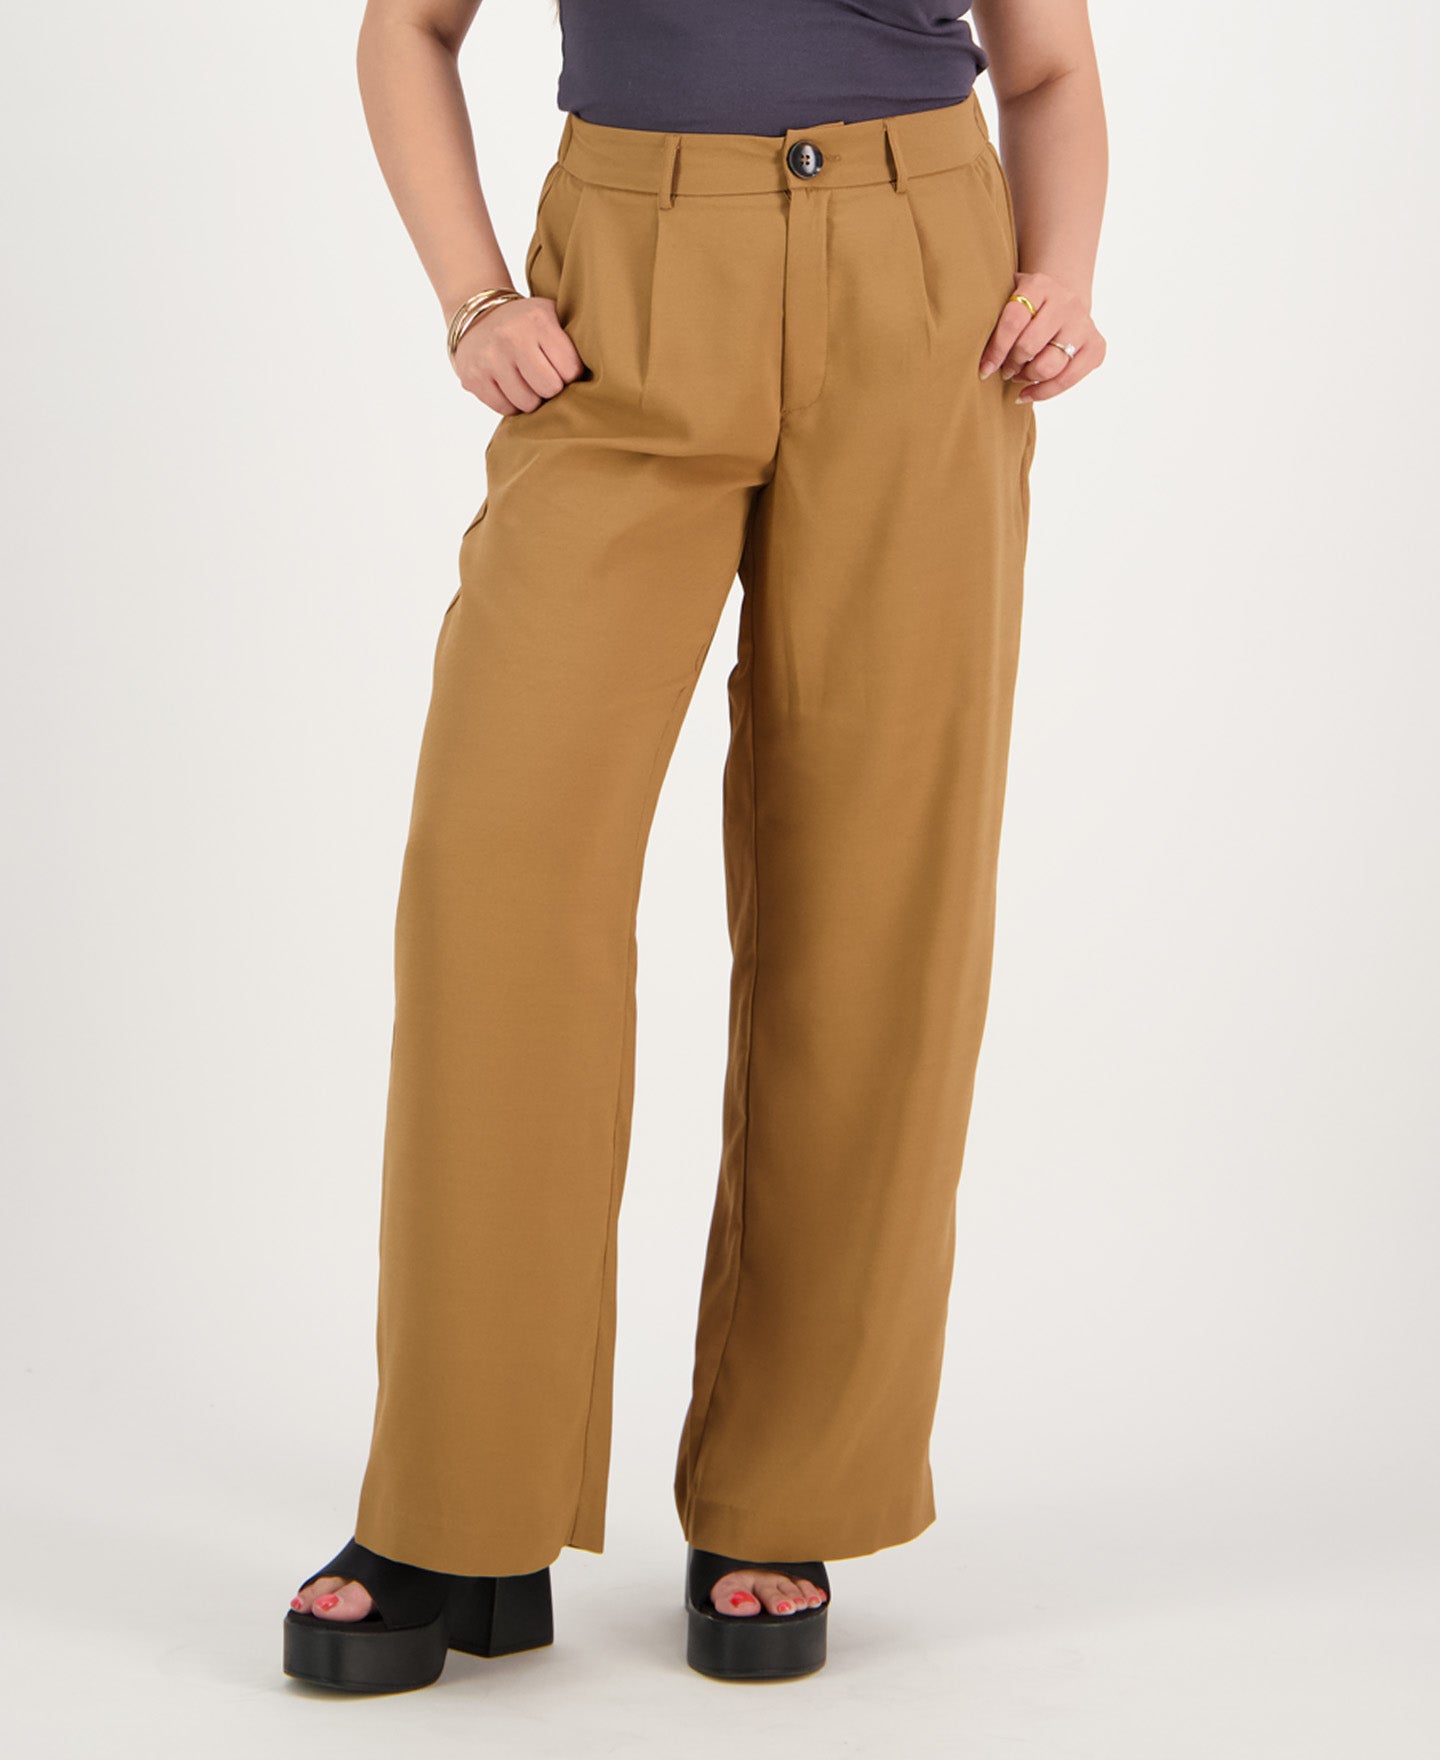 https://www.postie.co.nz/content/products/womens-lightweight-tailored-pant-coconut-a-outfit-820801.jpg